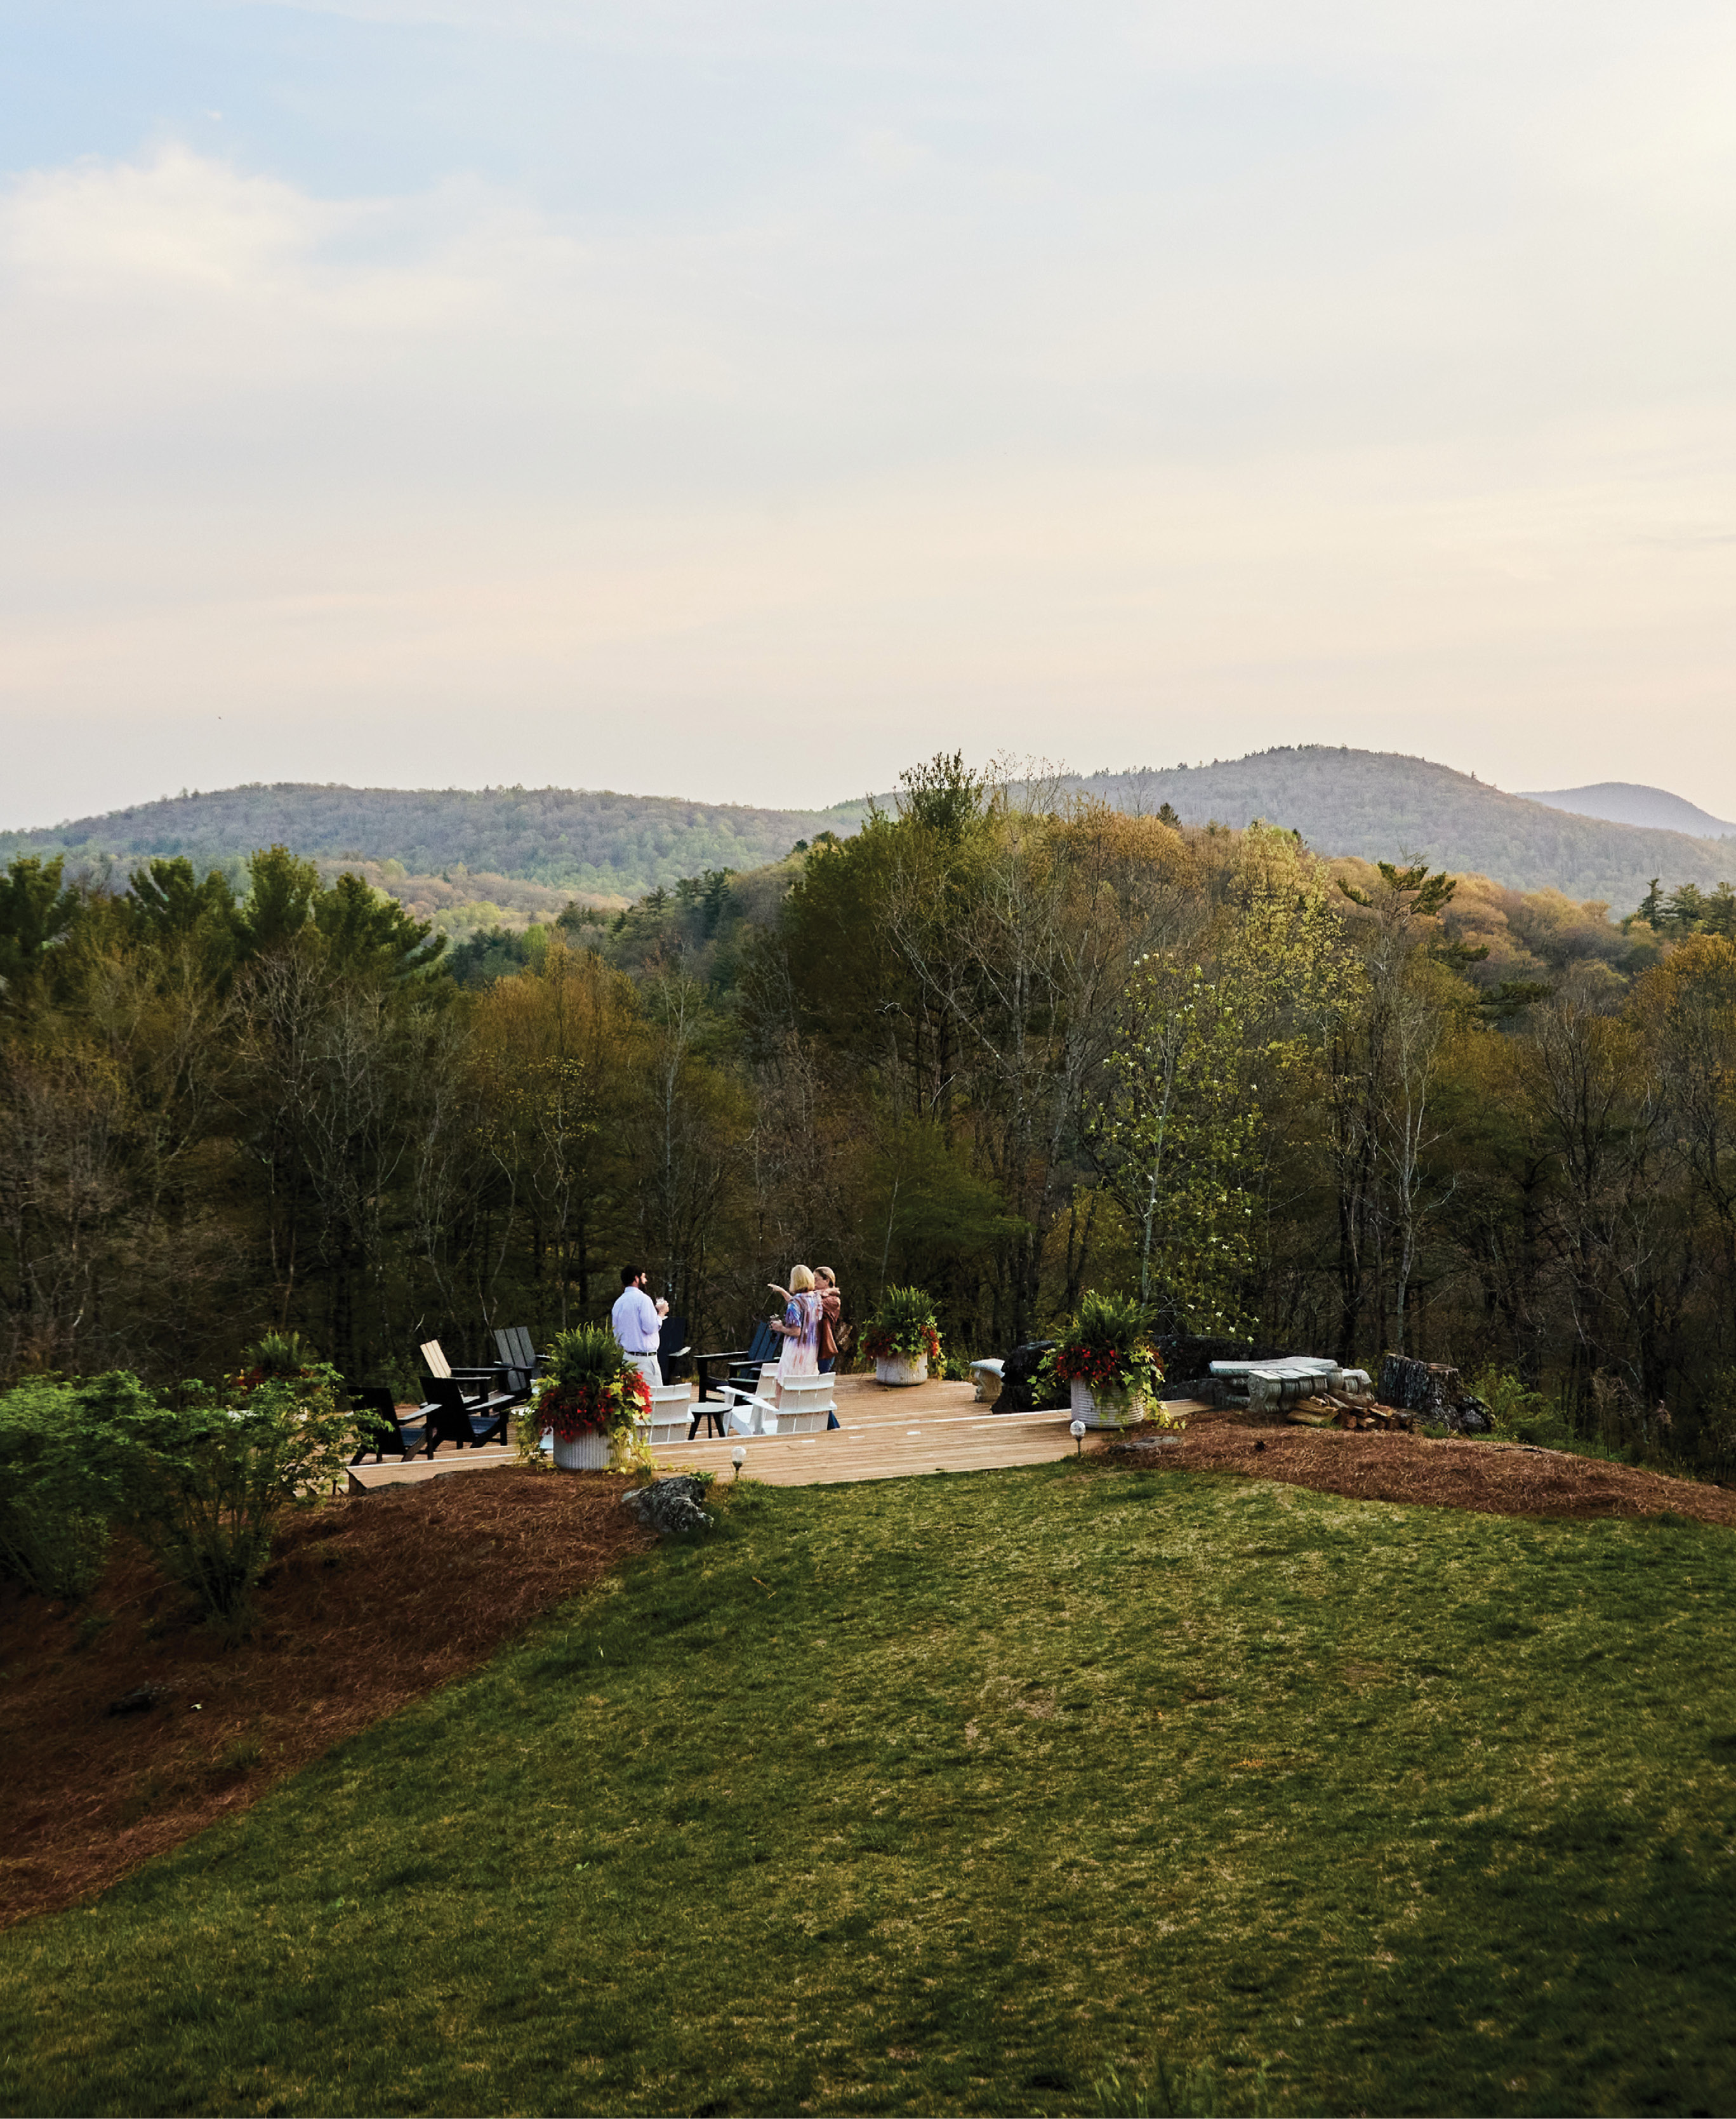 Mountains for Miles: A pre-dinner gathering on a patio at the 50-acre Skyline Lodge. Founded in 1875, the North Carolina town was promoted from its start for the cooler climate, healthy air, and excellent potential for orchards and gardens.